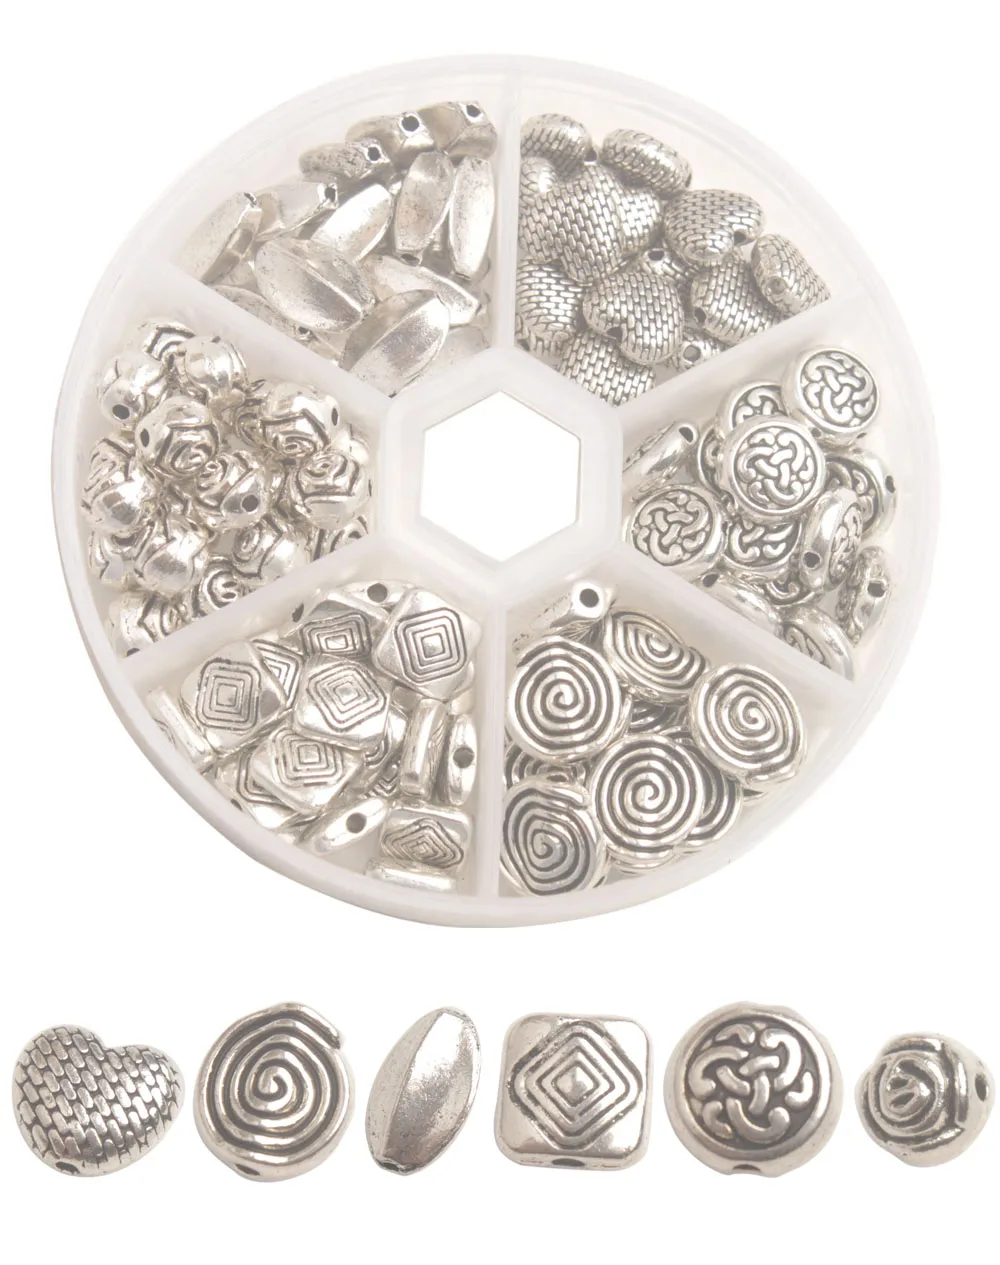 

Whole Sales 90PCS/Box Mixed Lots Antiqued Silver Metal Spacer Beads For Jewelry Making 6 Styles